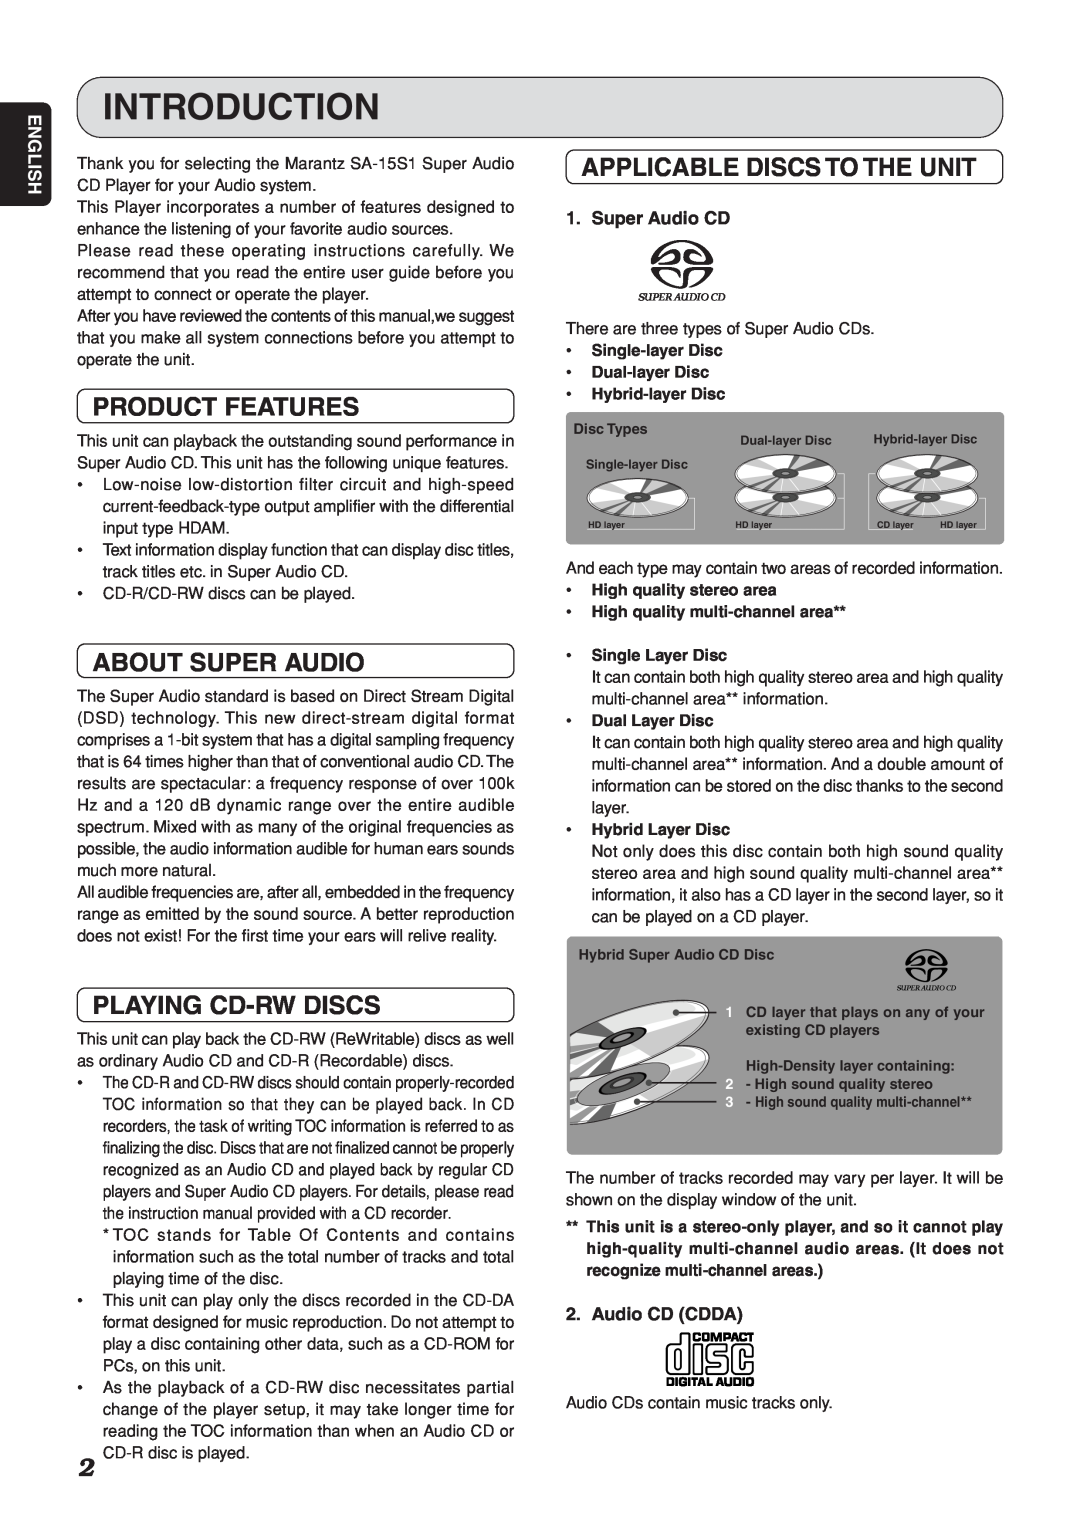 Marantz SA-15S1 manual Introduction, Applicable Discs To The Unit, Product Features, About Super Audio, Playing Cd-Rwdiscs 